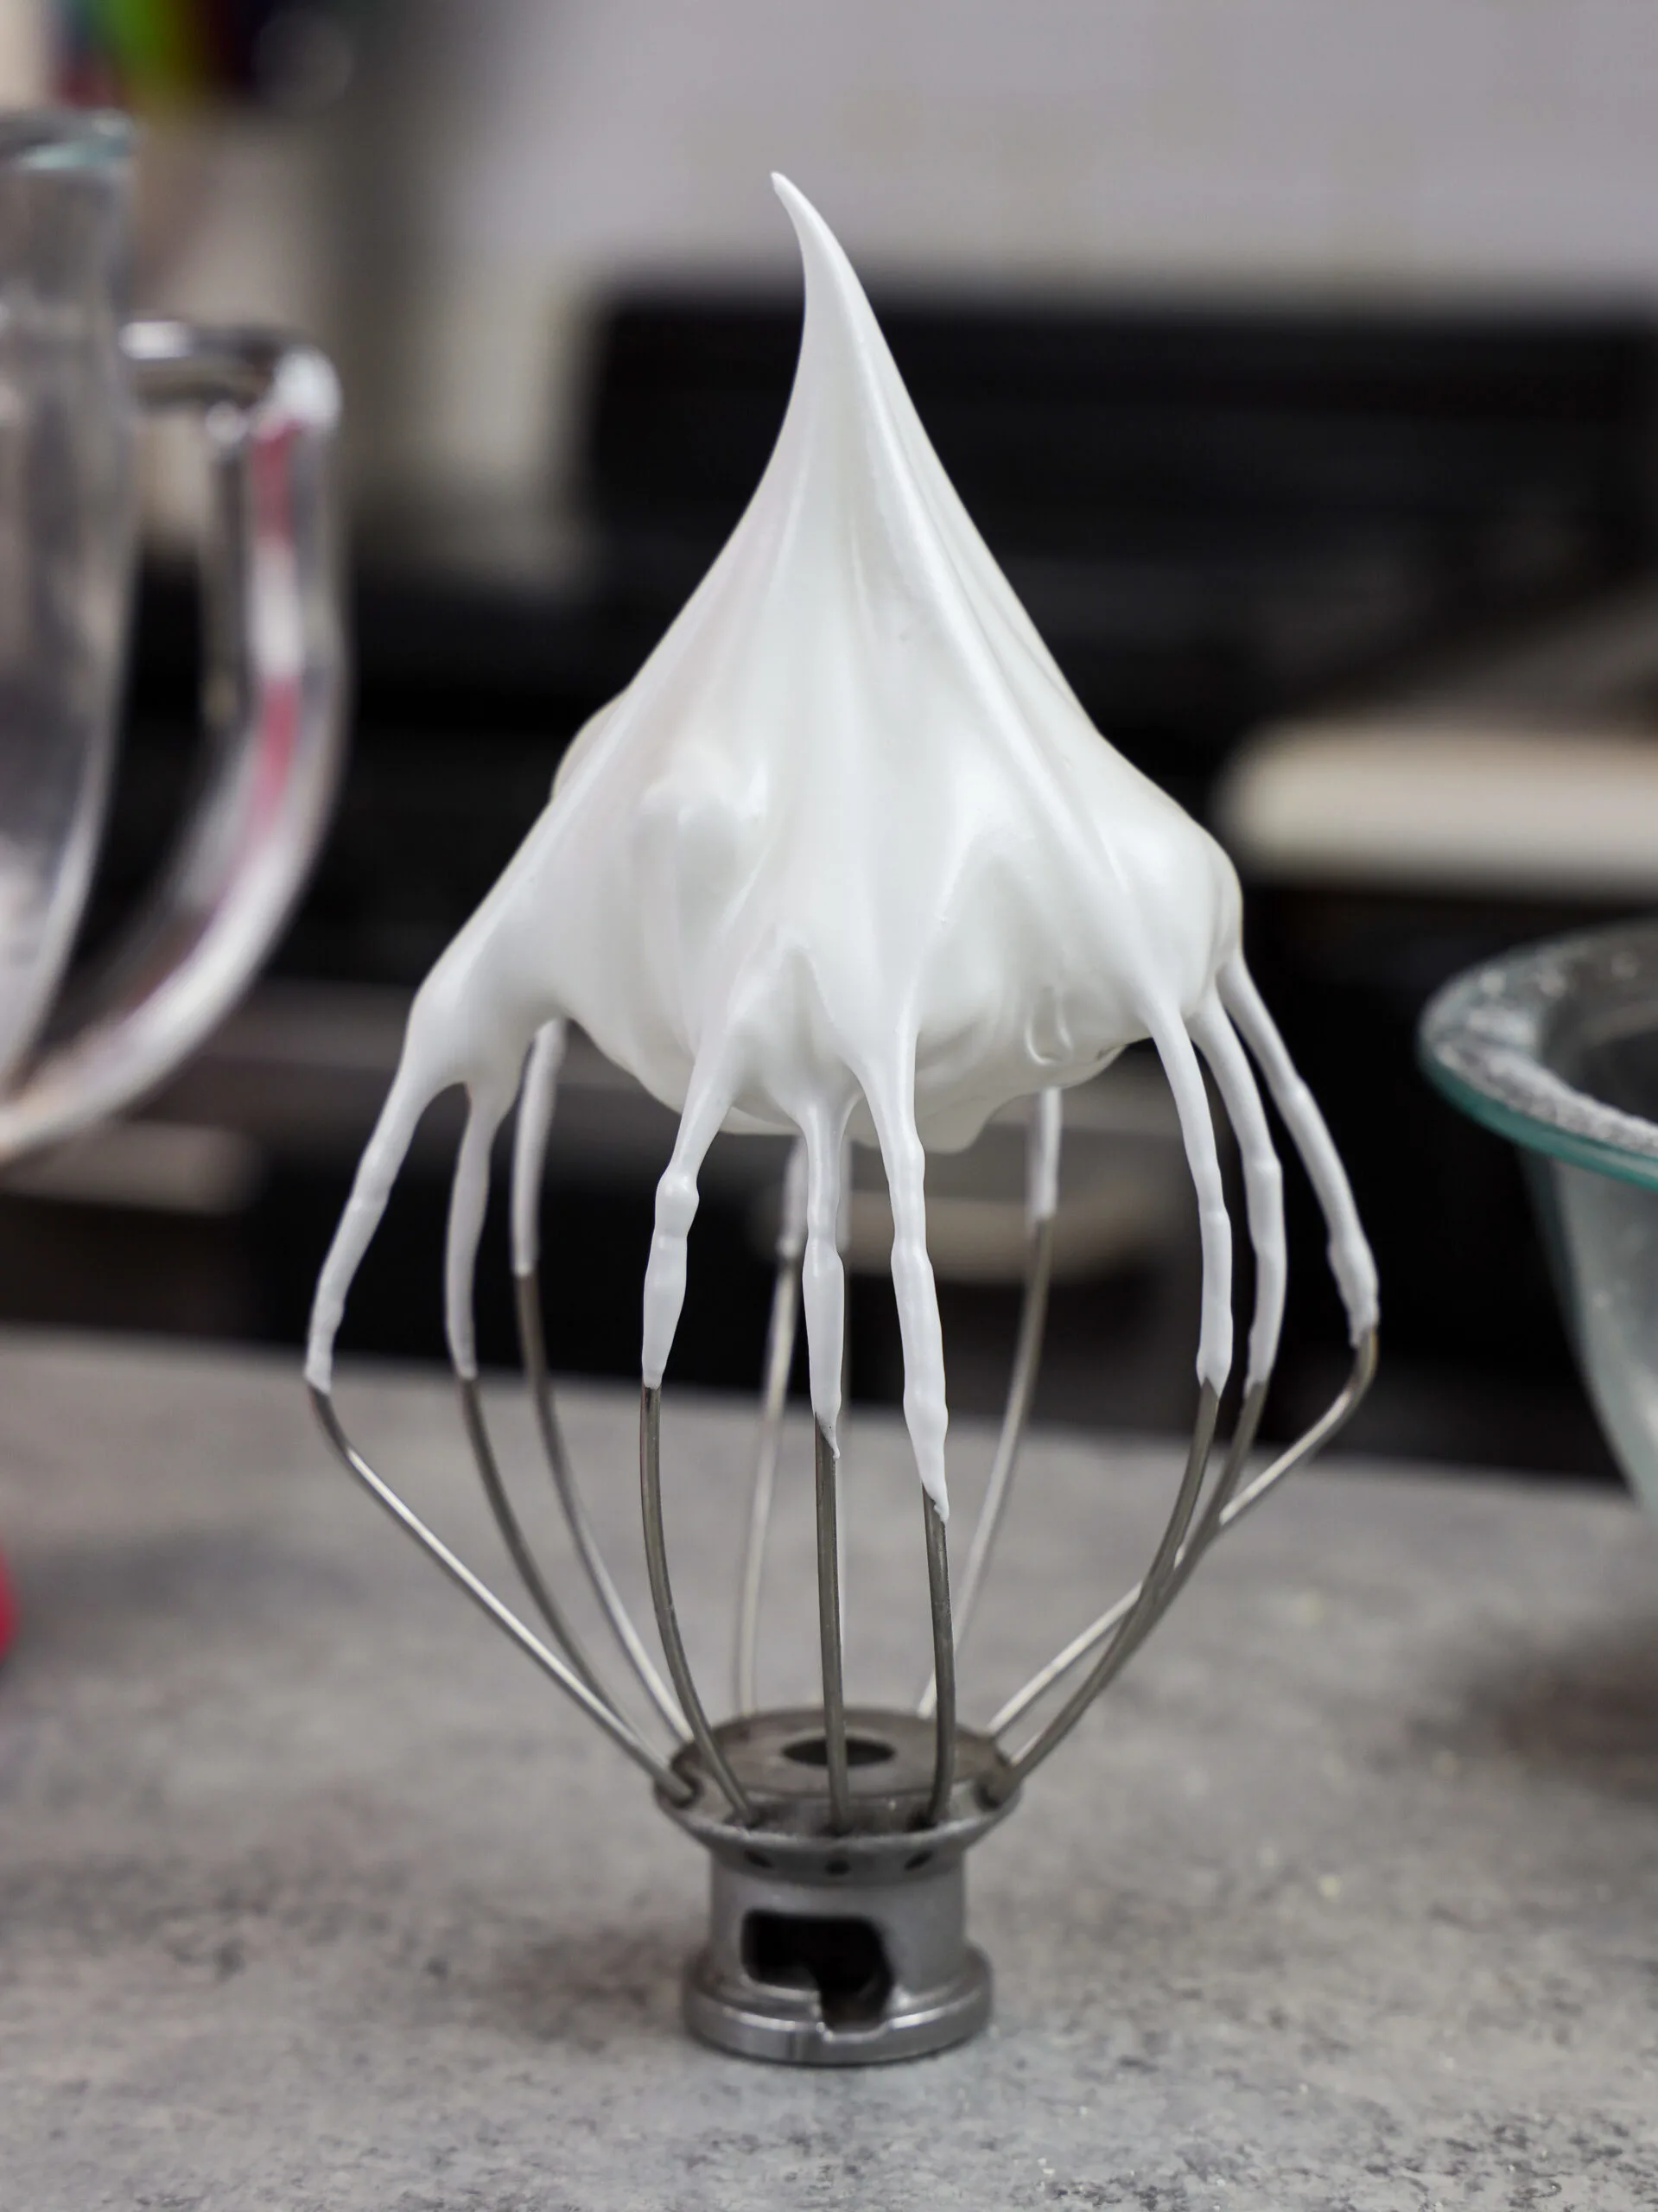 image of french meringue that's been whipped to have stiff peaks and is perfect for making macarons